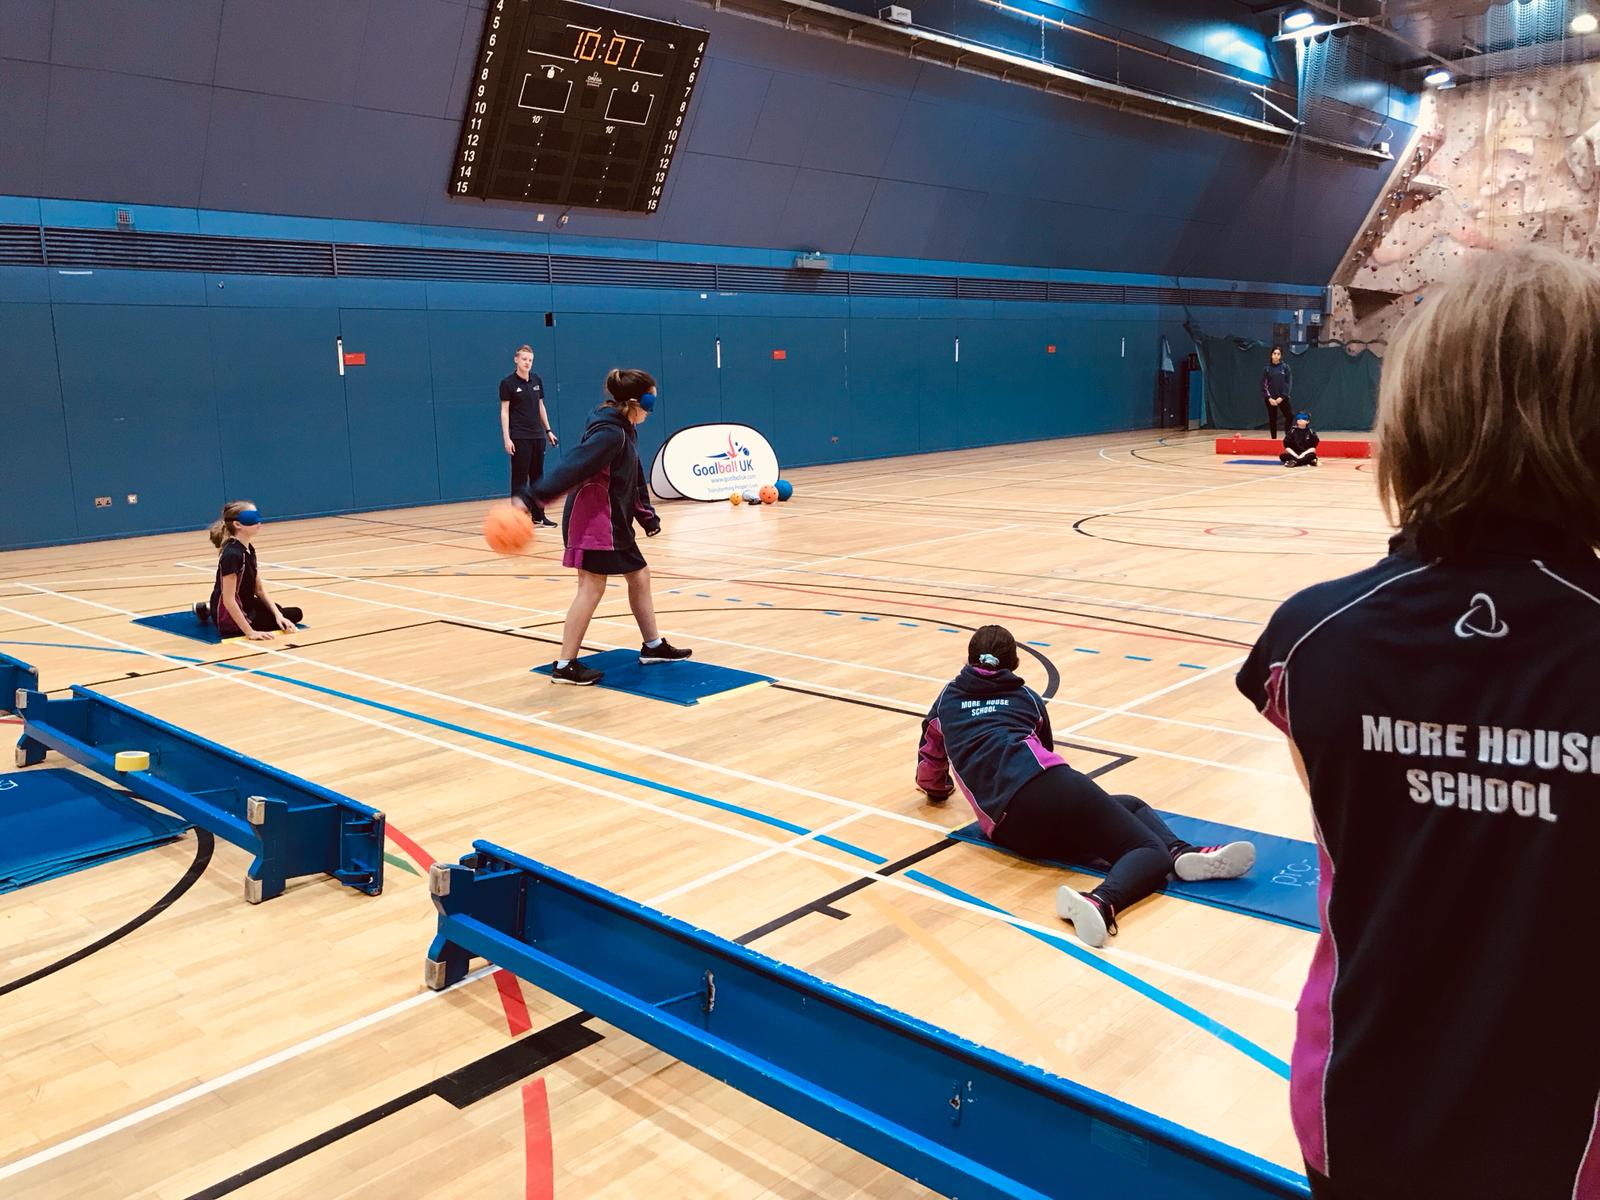 Action shot from Goalball UK School session in London